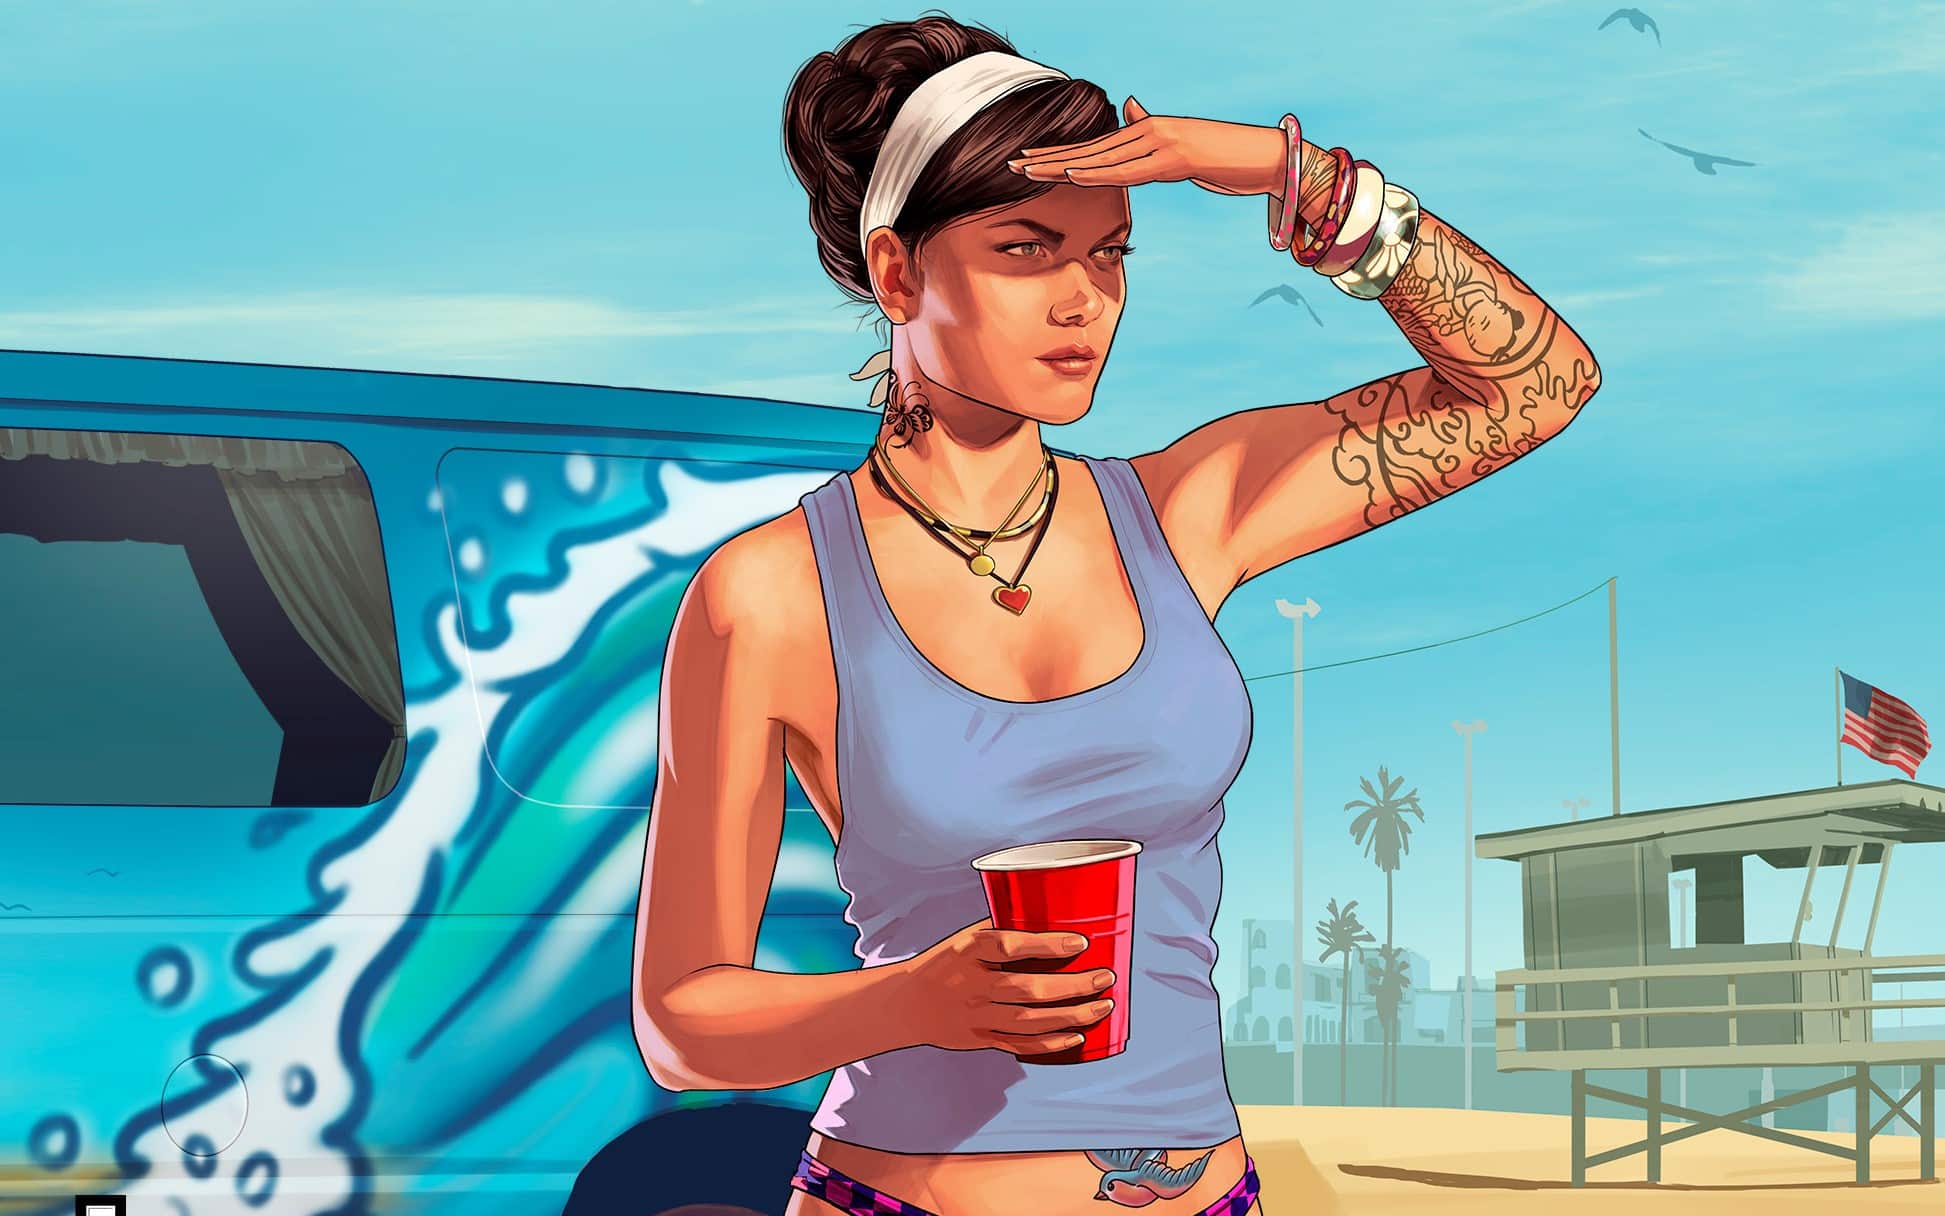 GTA VI trailer likely to drop in December as Rockstar Games completes 25  years - India Today